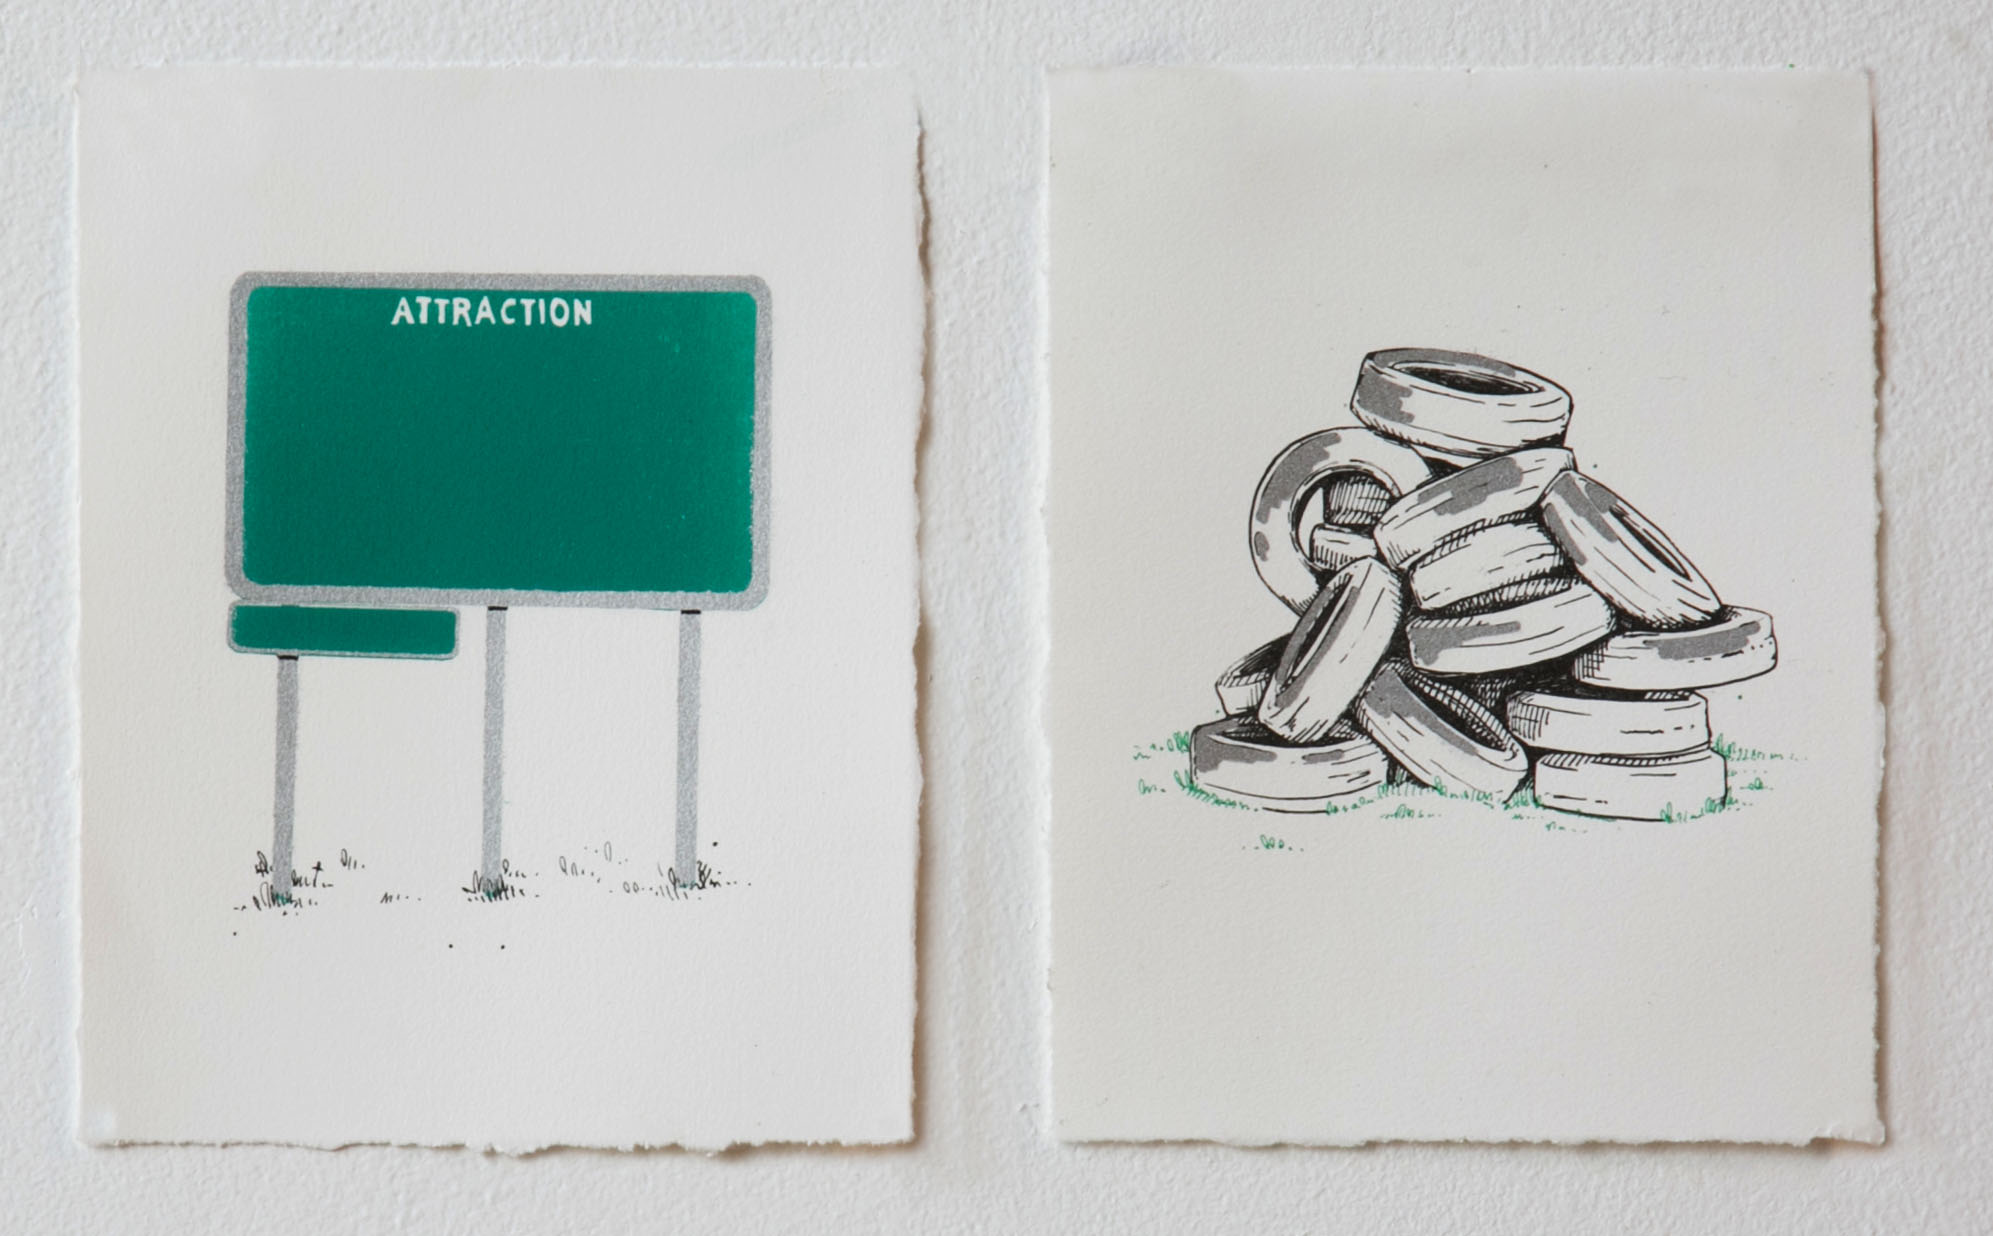   roadside attractions 3 + 4   color lithograph with silver dusting, 2018  diptych, 7 x 9 in. each 